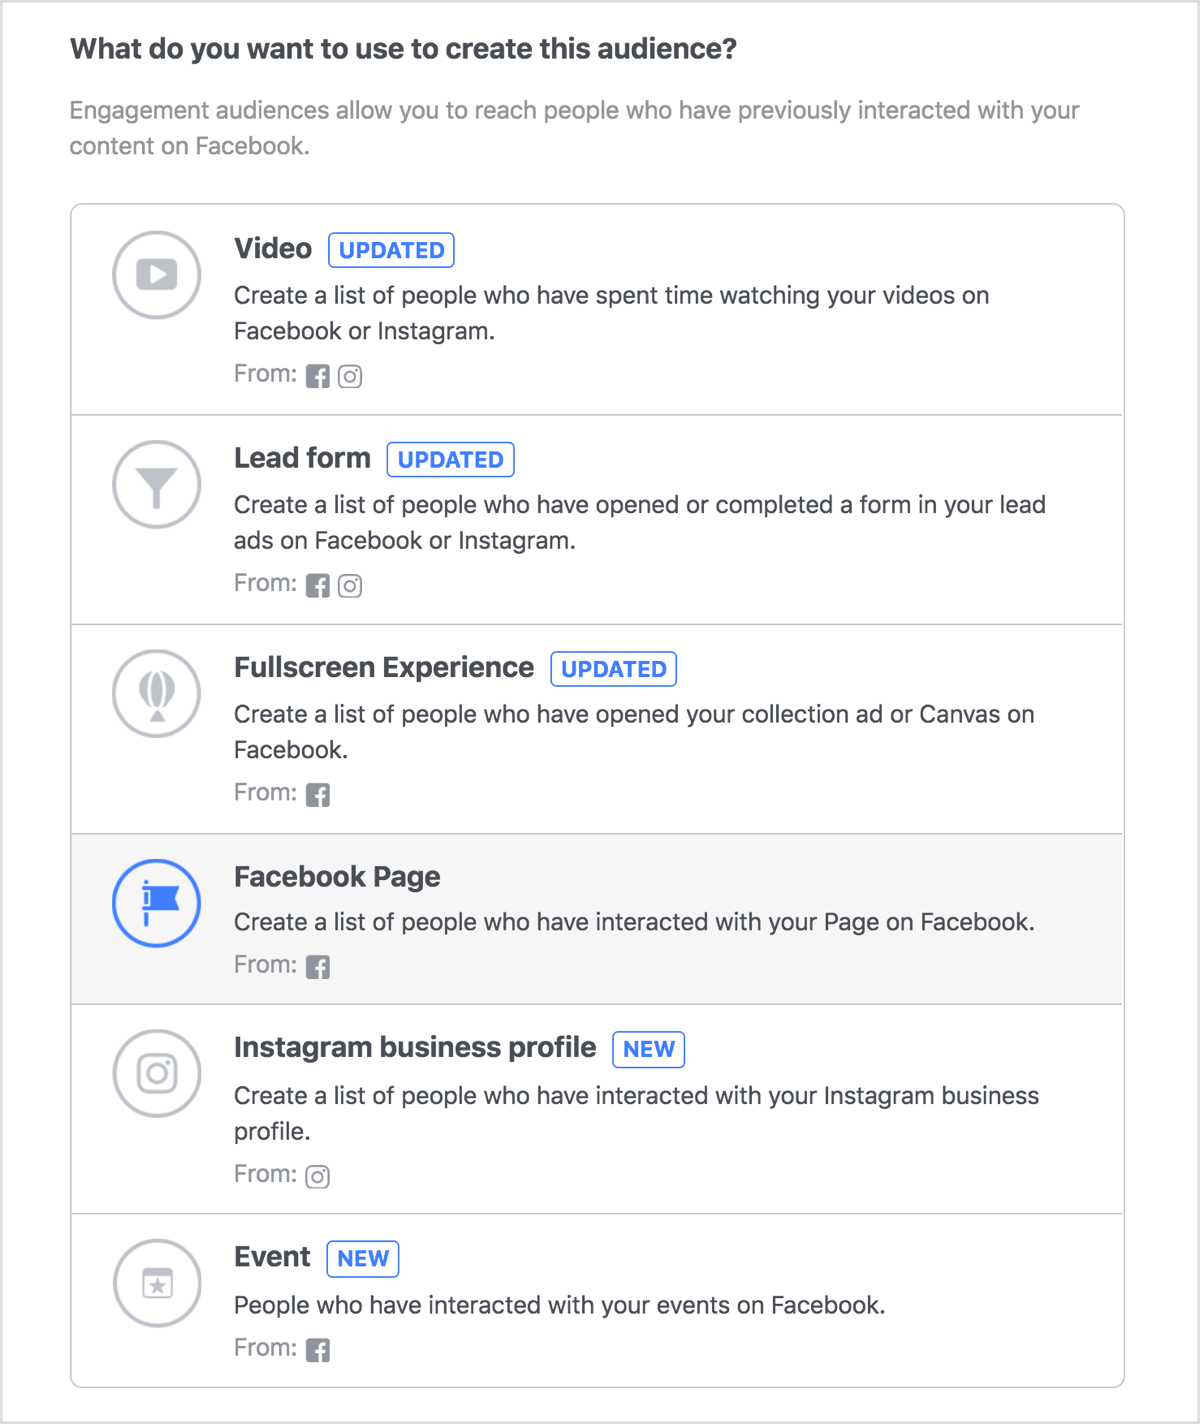 Select Facebook Page for your engagement custom audience.